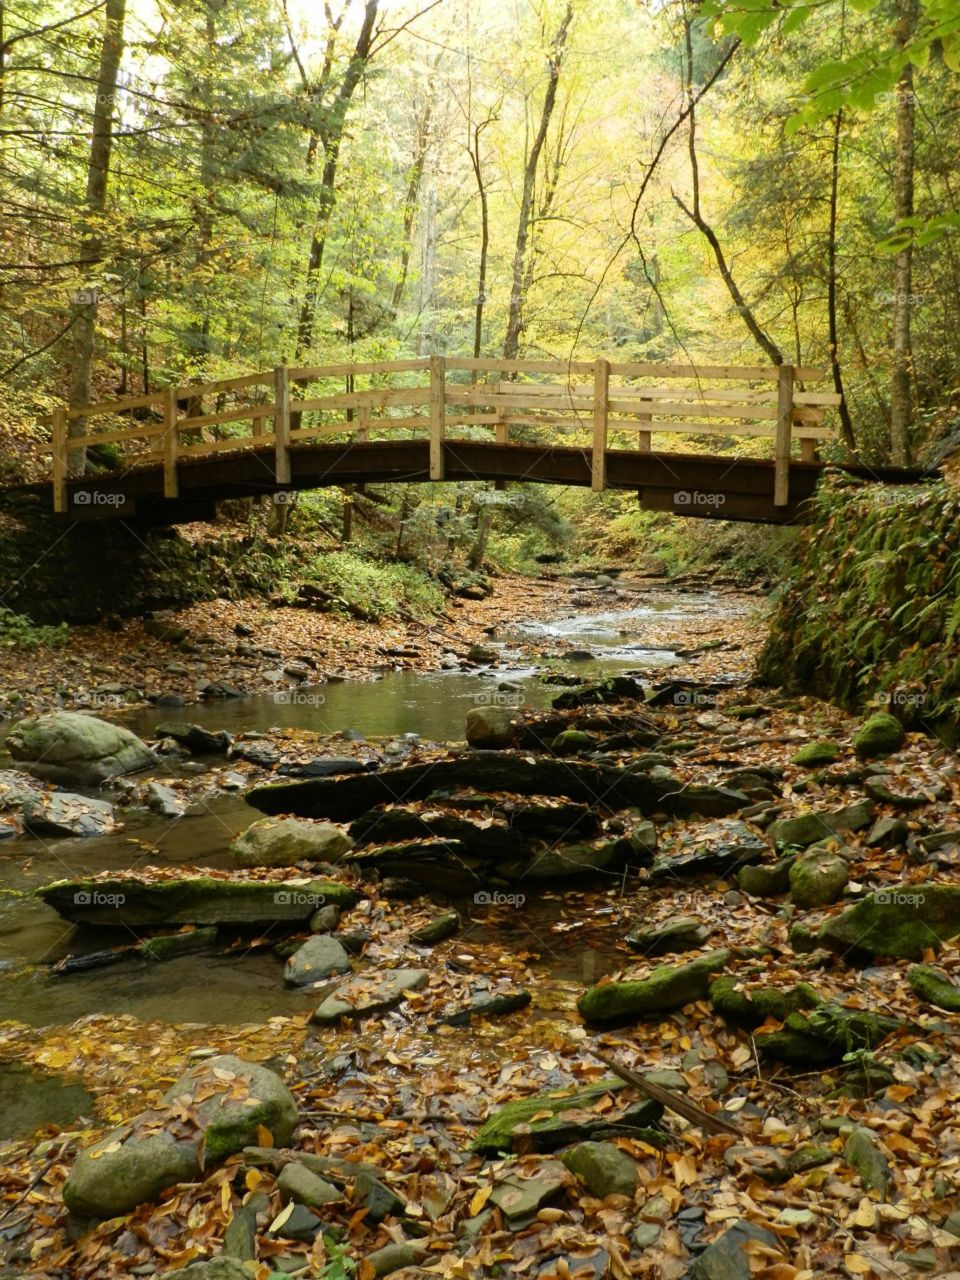 Fall in the Glen. Leaf covered ground and bridge in the autumn